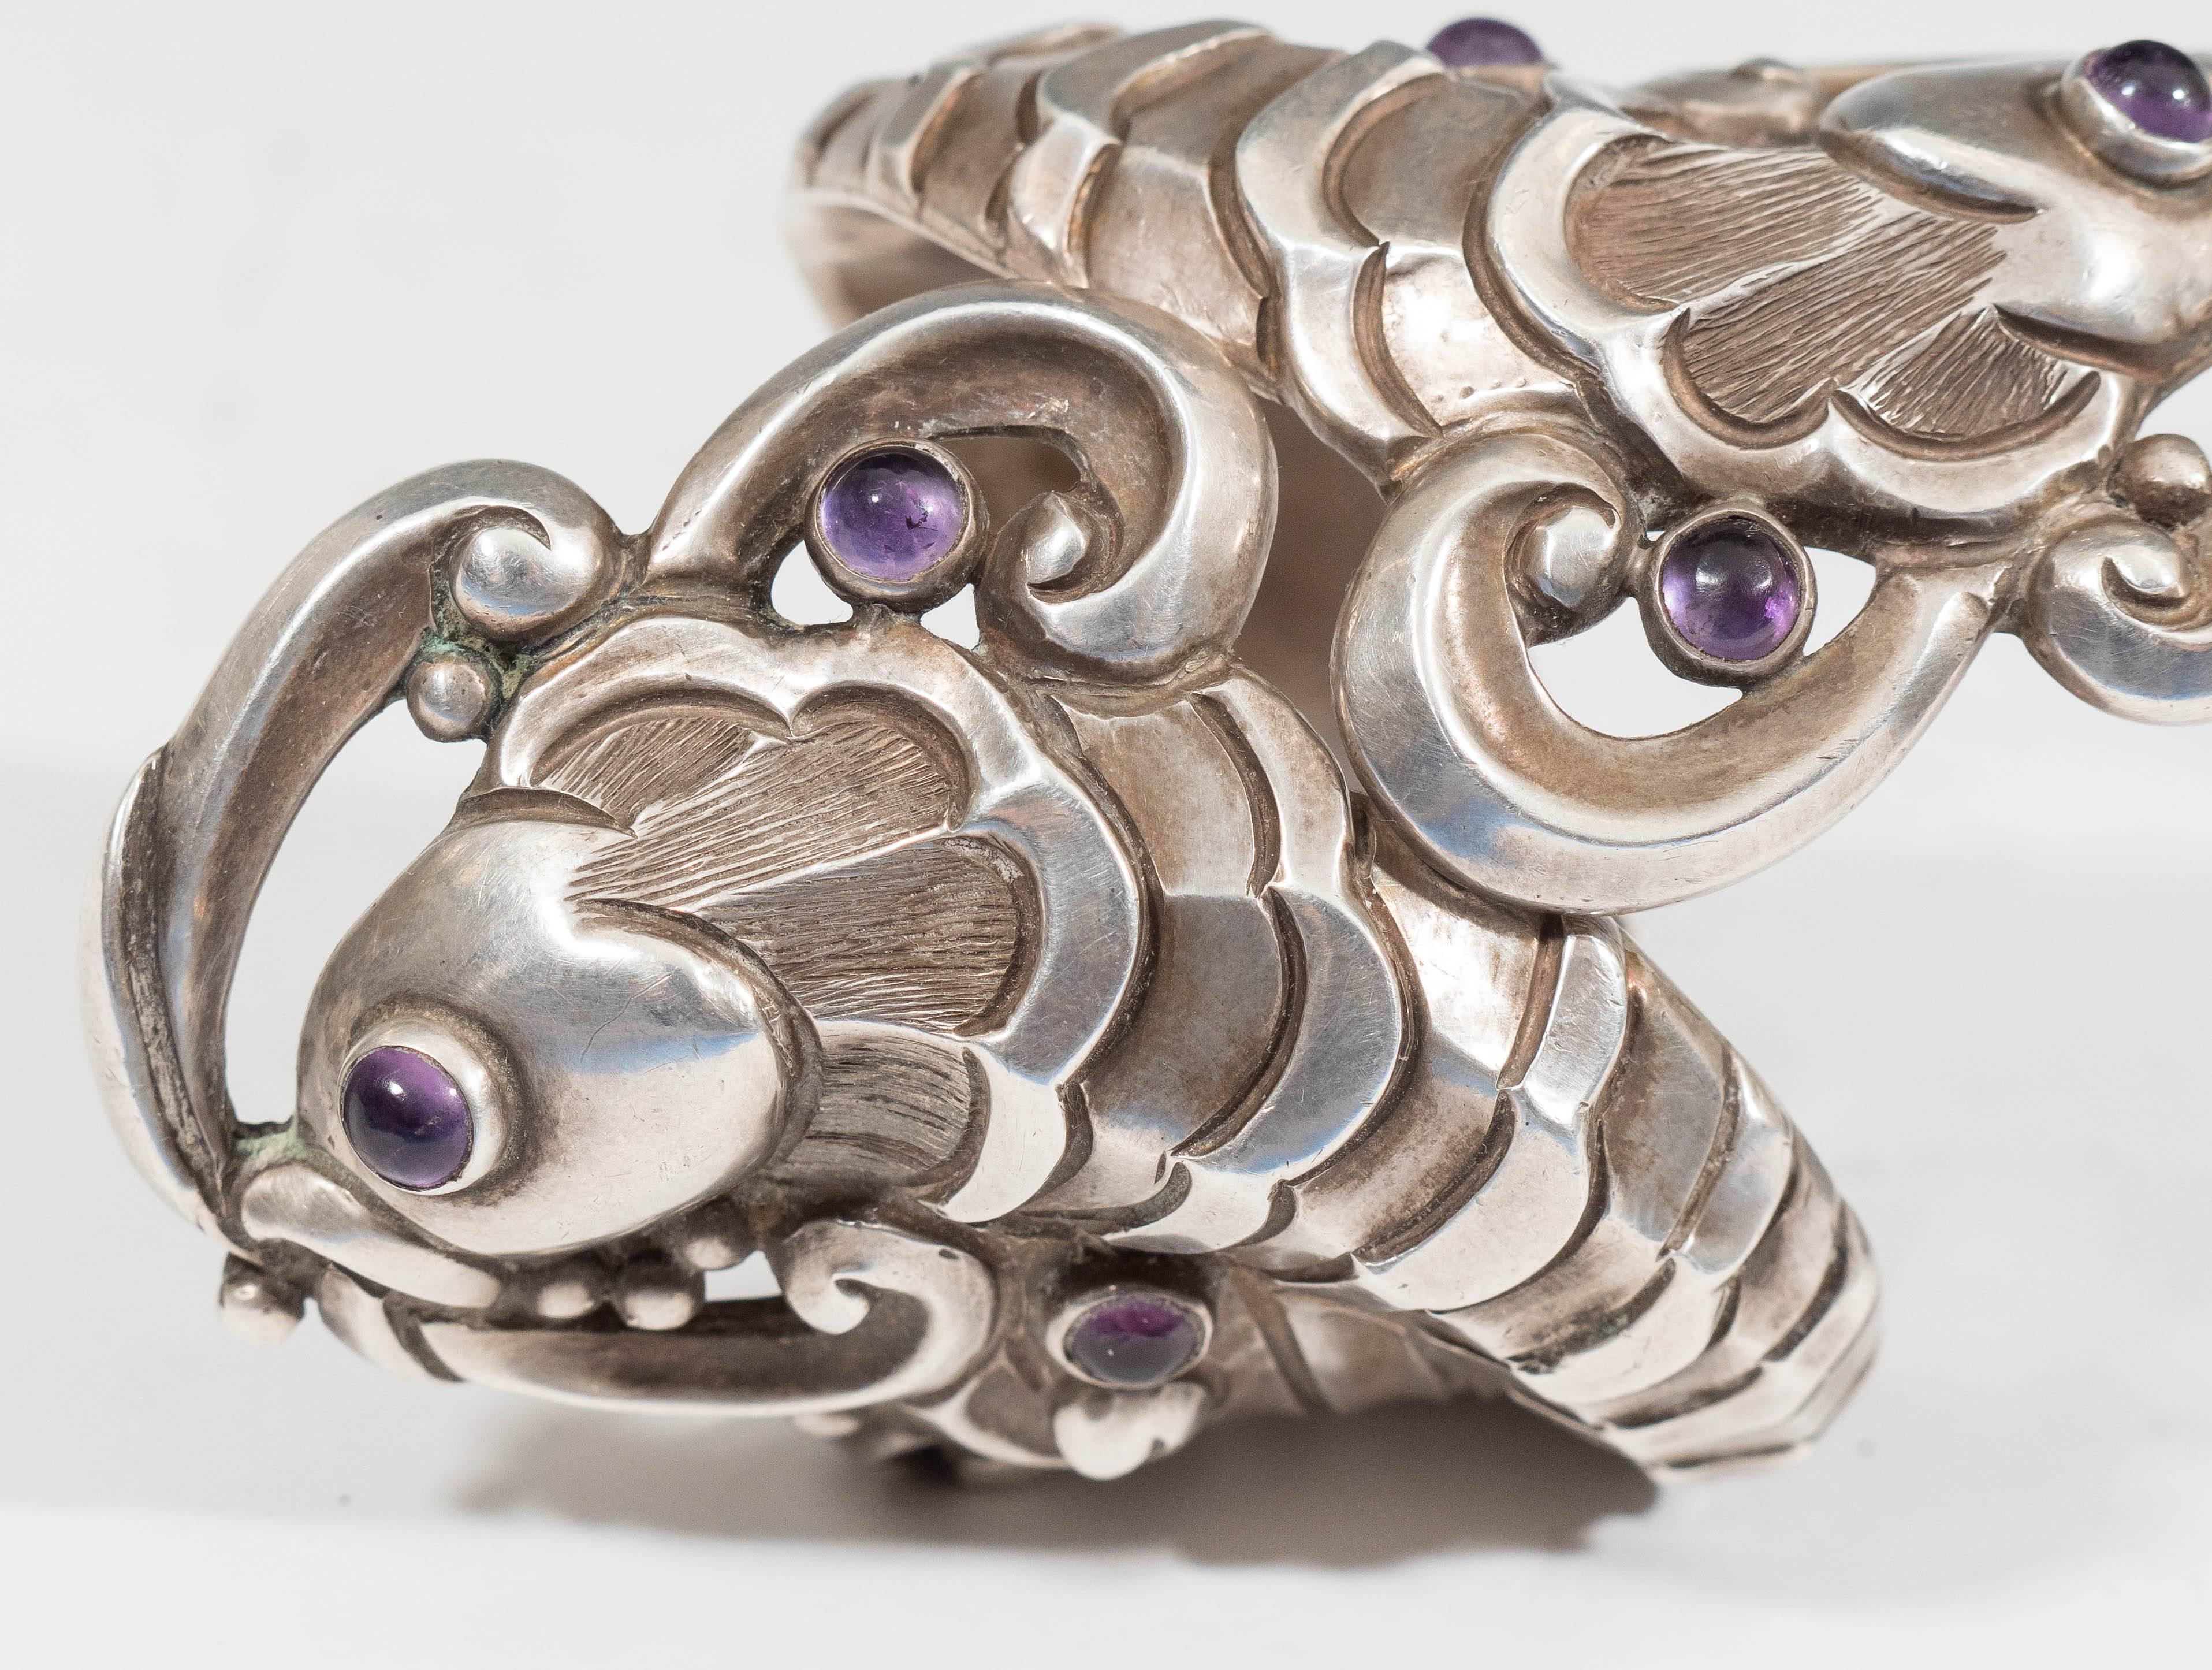 Mexican Margot De Taxco Sterling Silver Koi Fish Clamper Bracelet with Amethyst Stones